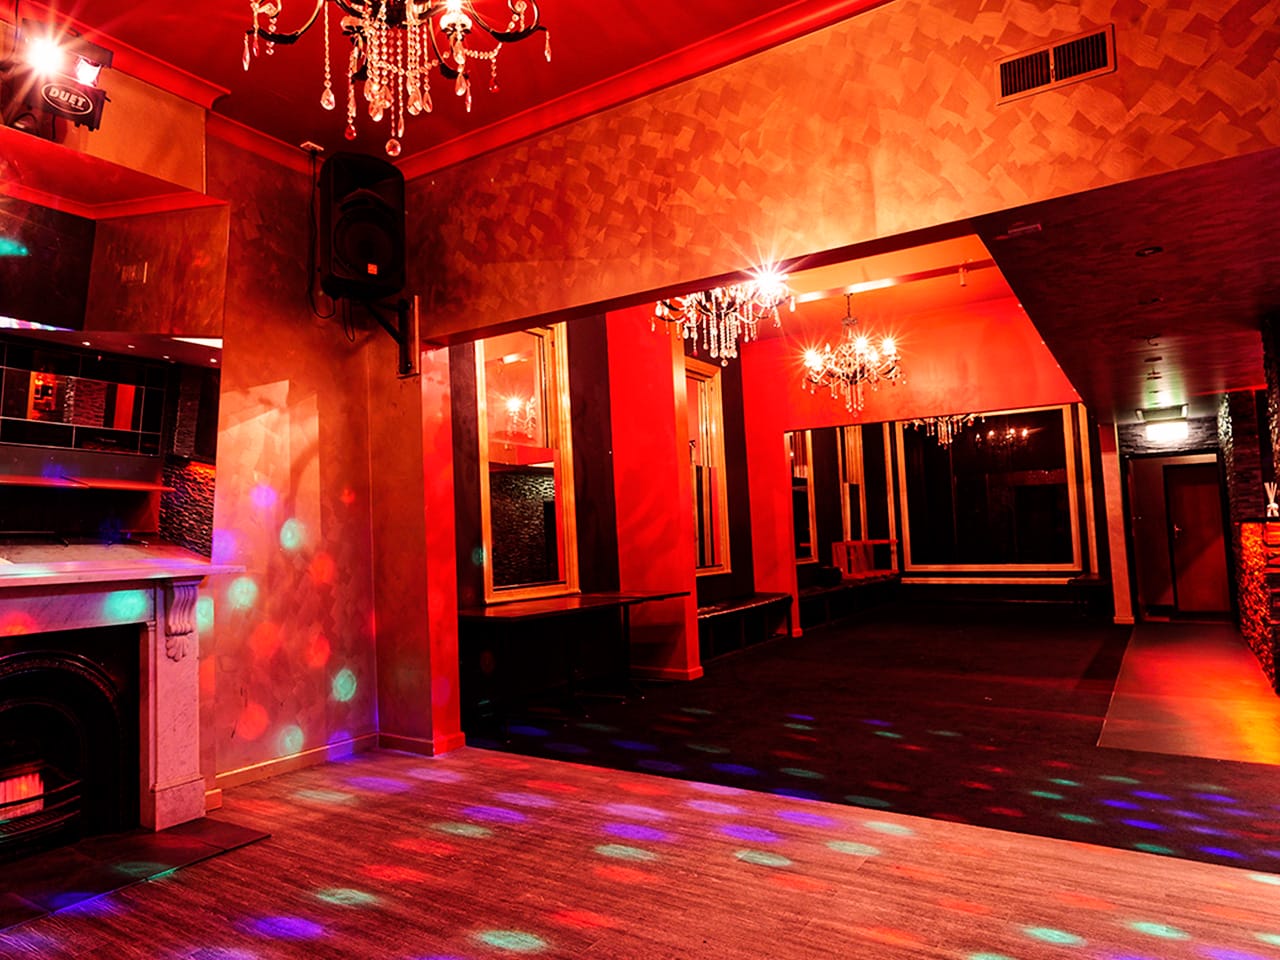 Empty Function Room With Chandelier And Red Lighting